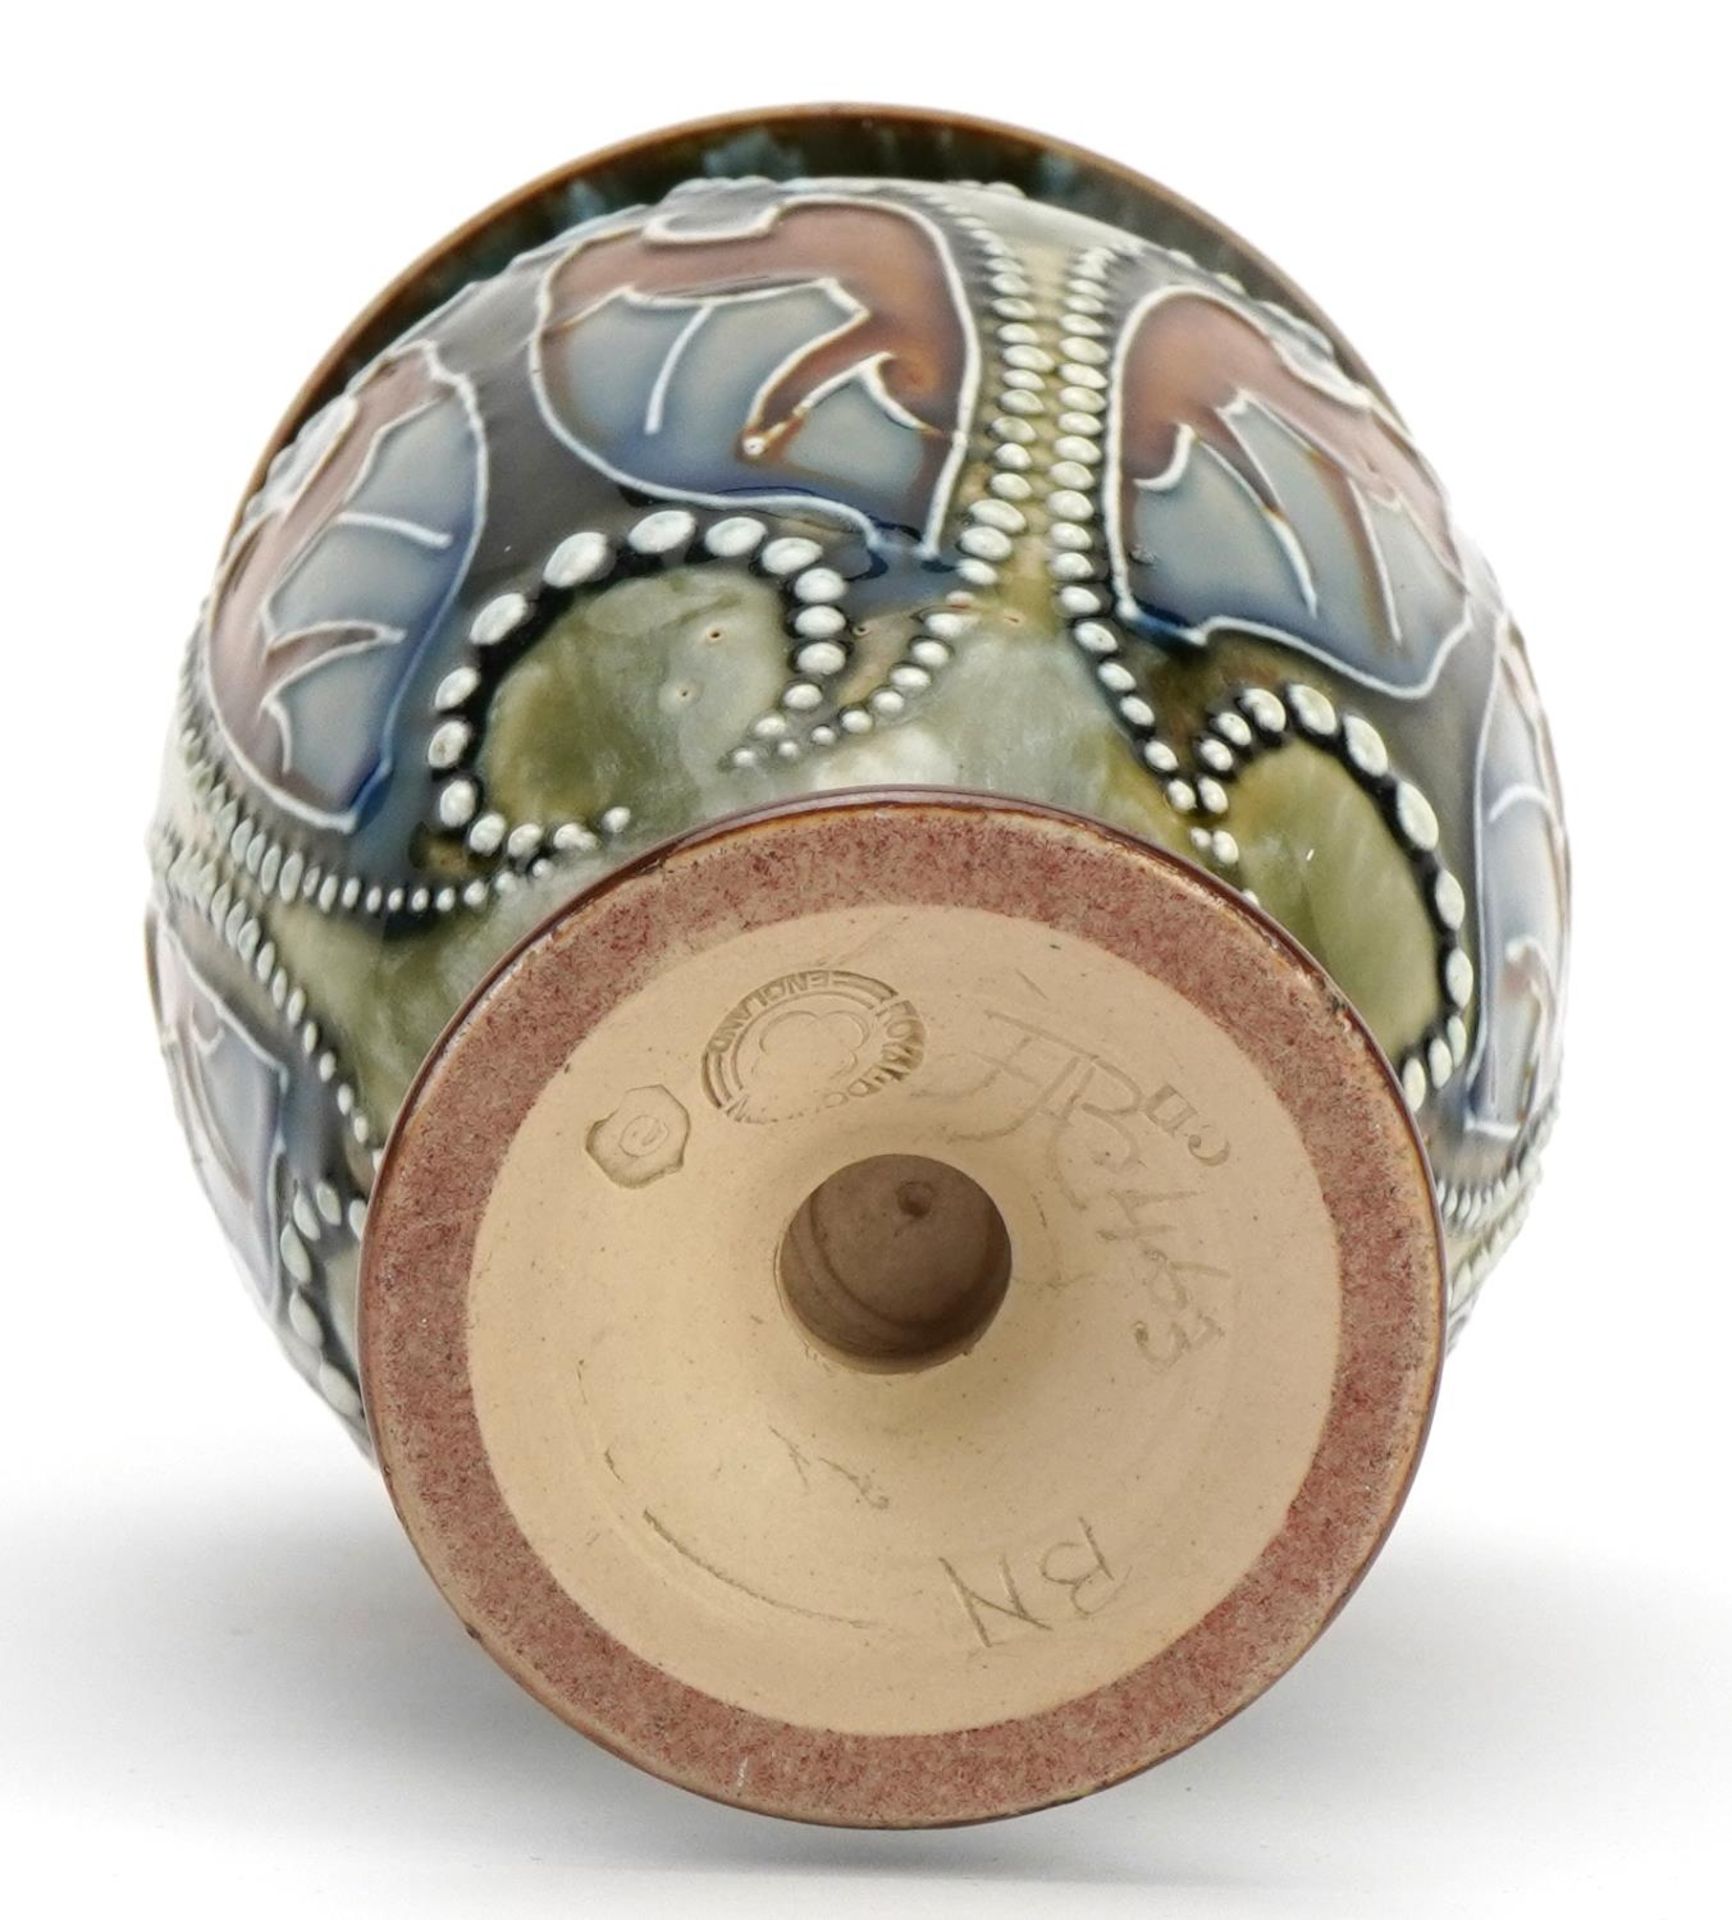 Frank Barlow for Royal Doulton, Art Nouveau stoneware vase hand painted with flowers, 16.5cm high - Image 3 of 4